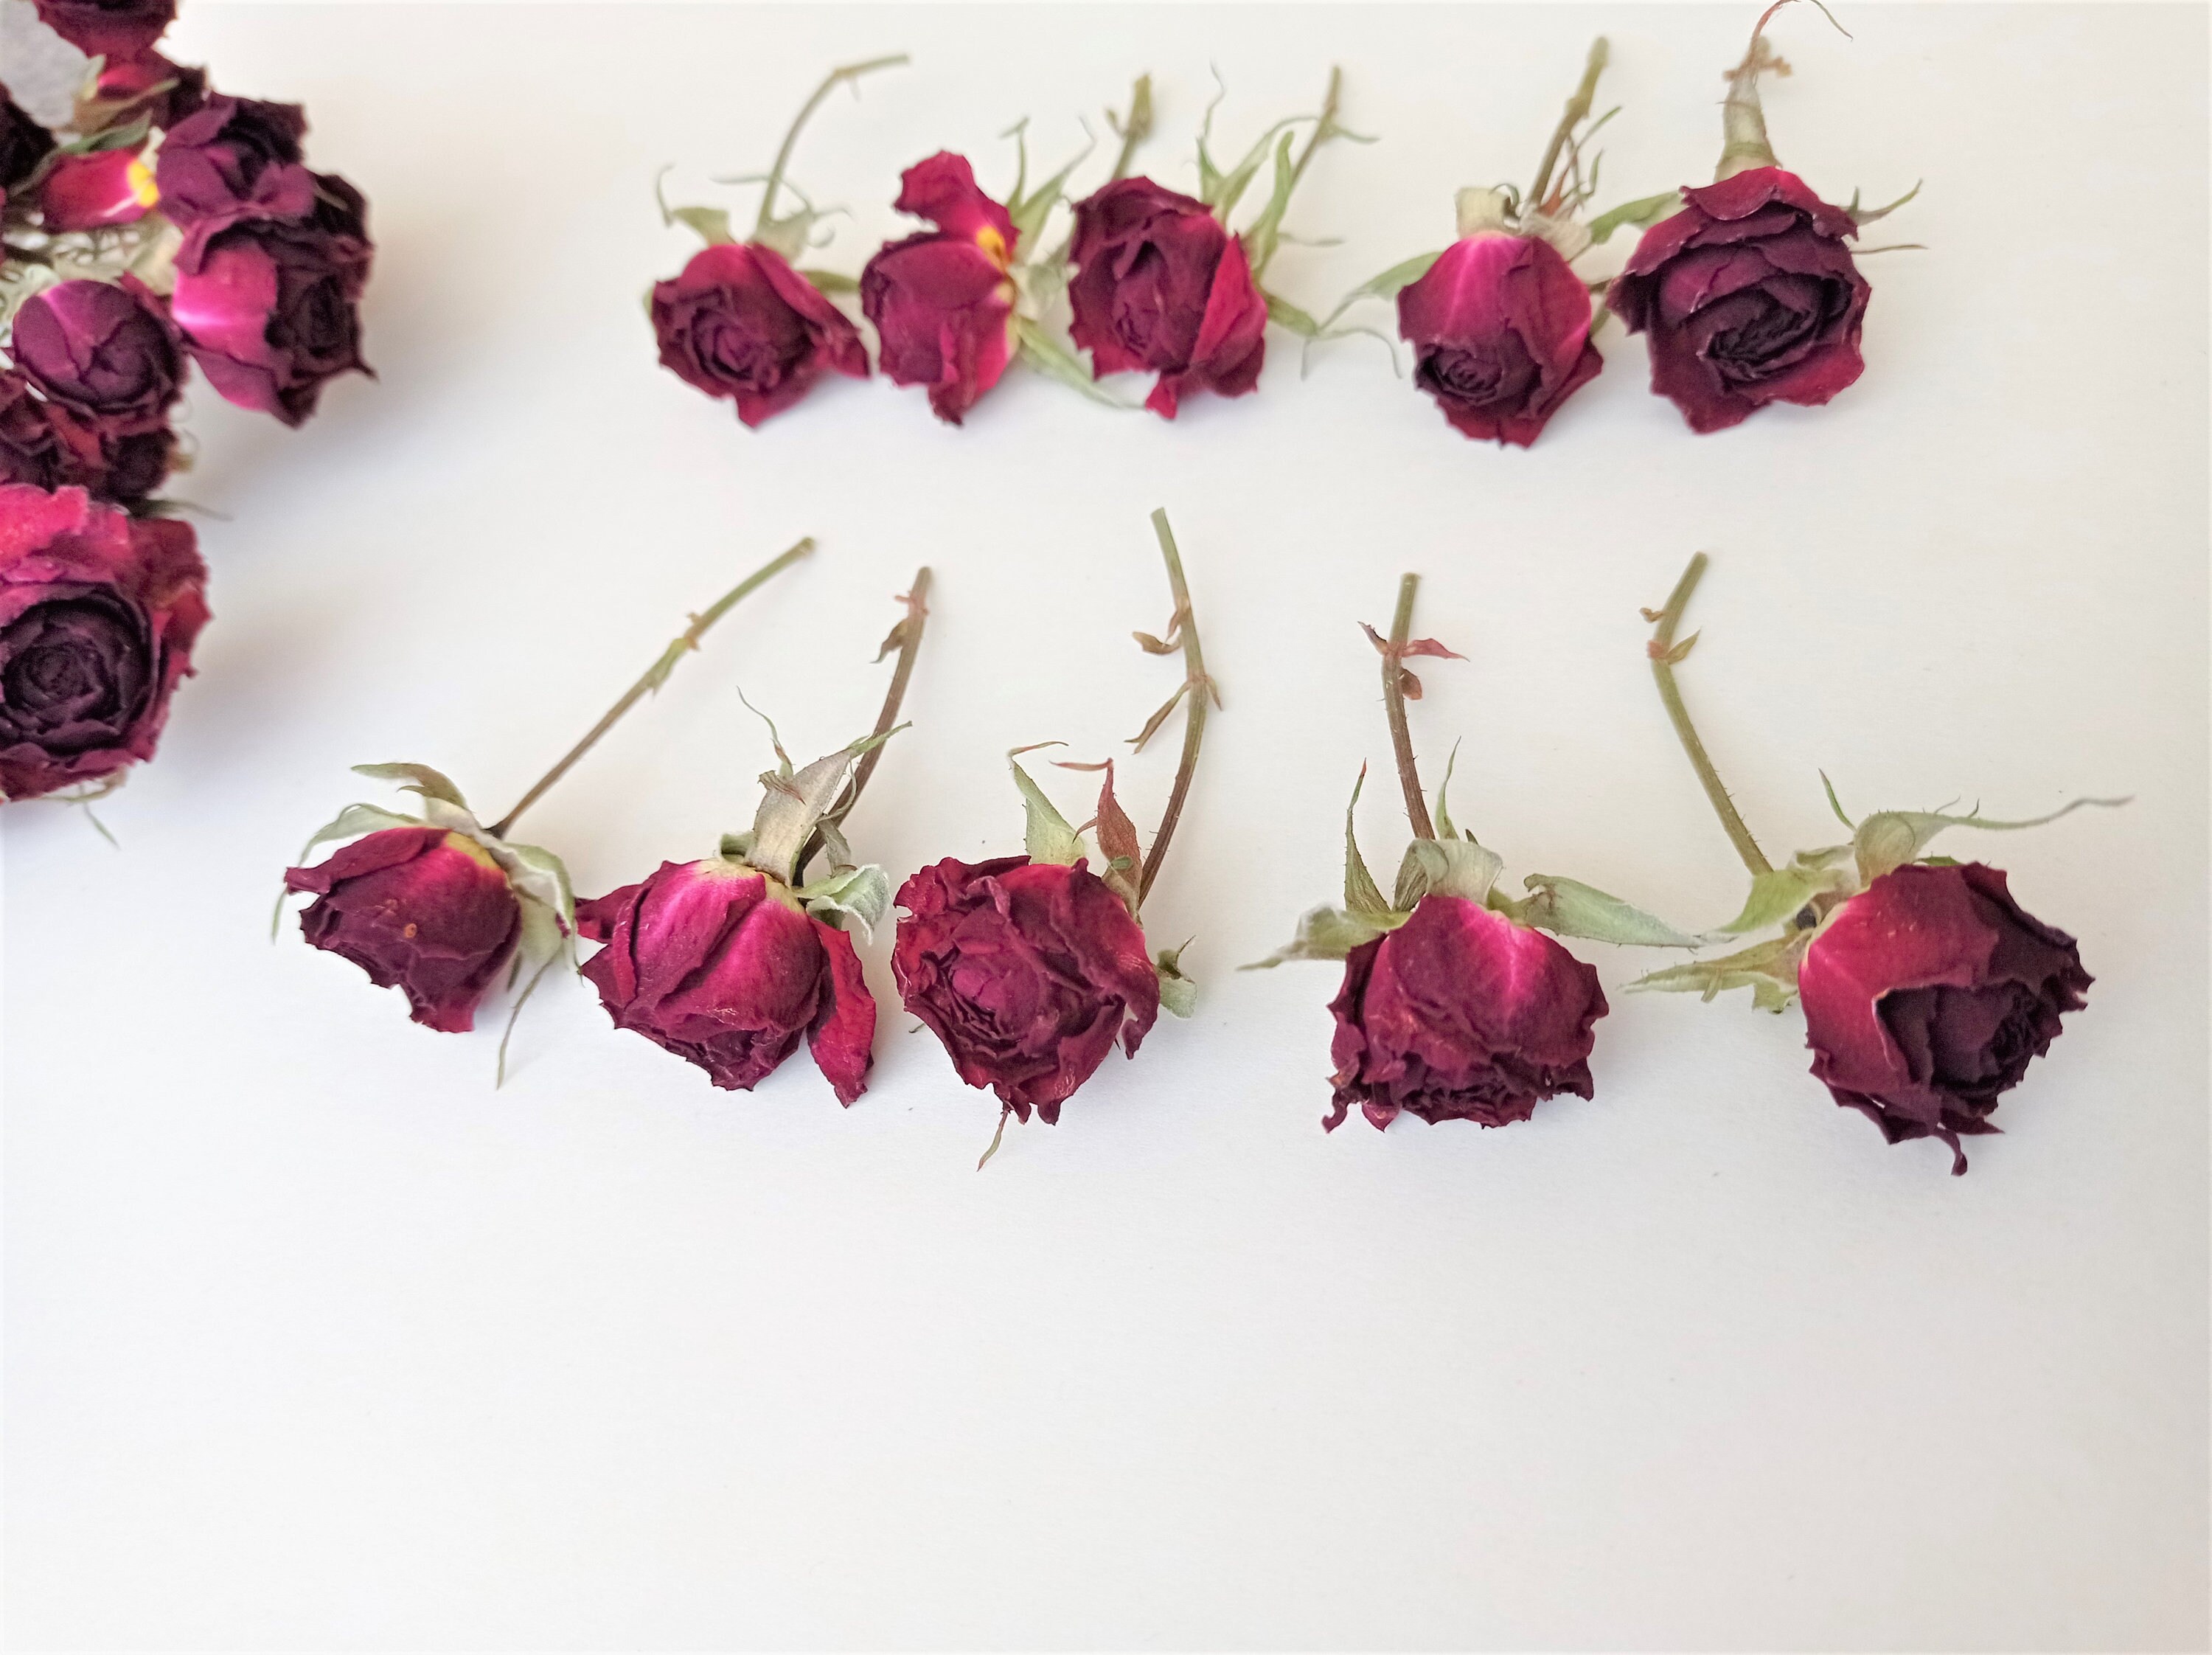 Dried Tiny Red Roses 5pcs, Small Burgundy Roses, Dark Red Dried Roses for  Decors 